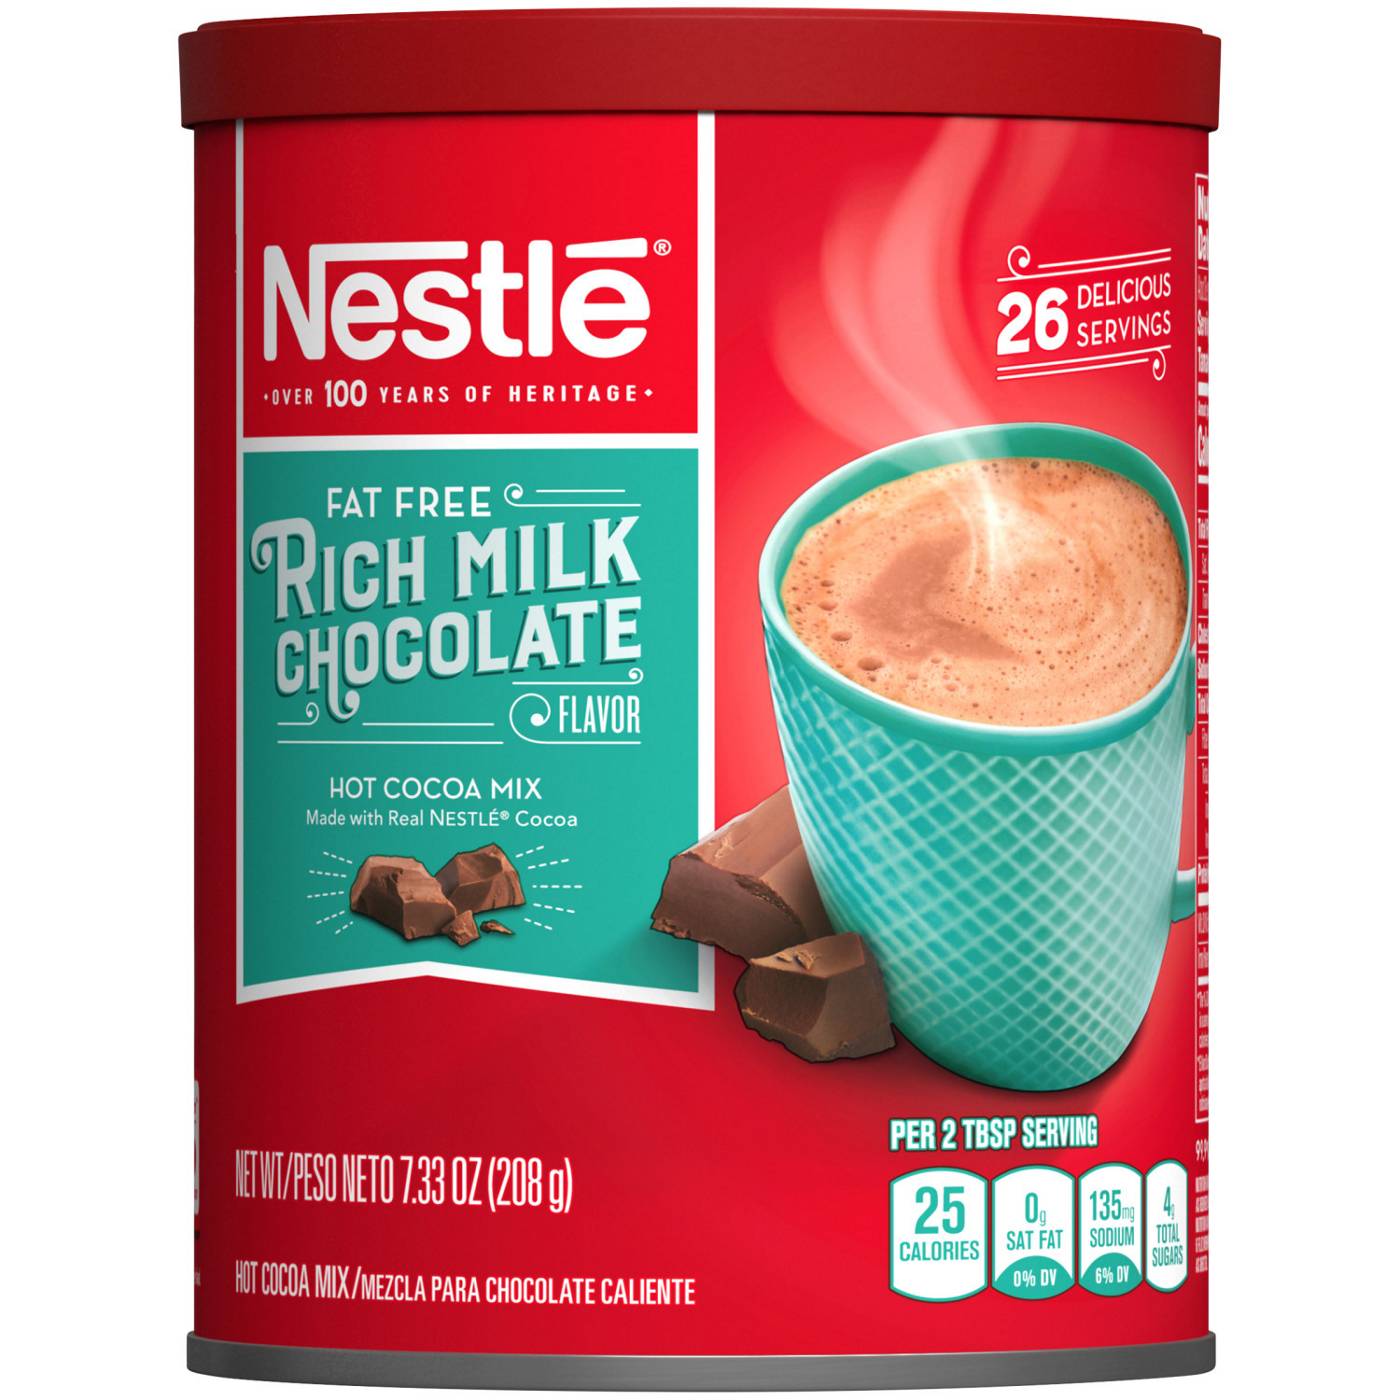 Nestle Fat Free Rich Milk Chocolate Hot Cocoa Mix; image 1 of 8